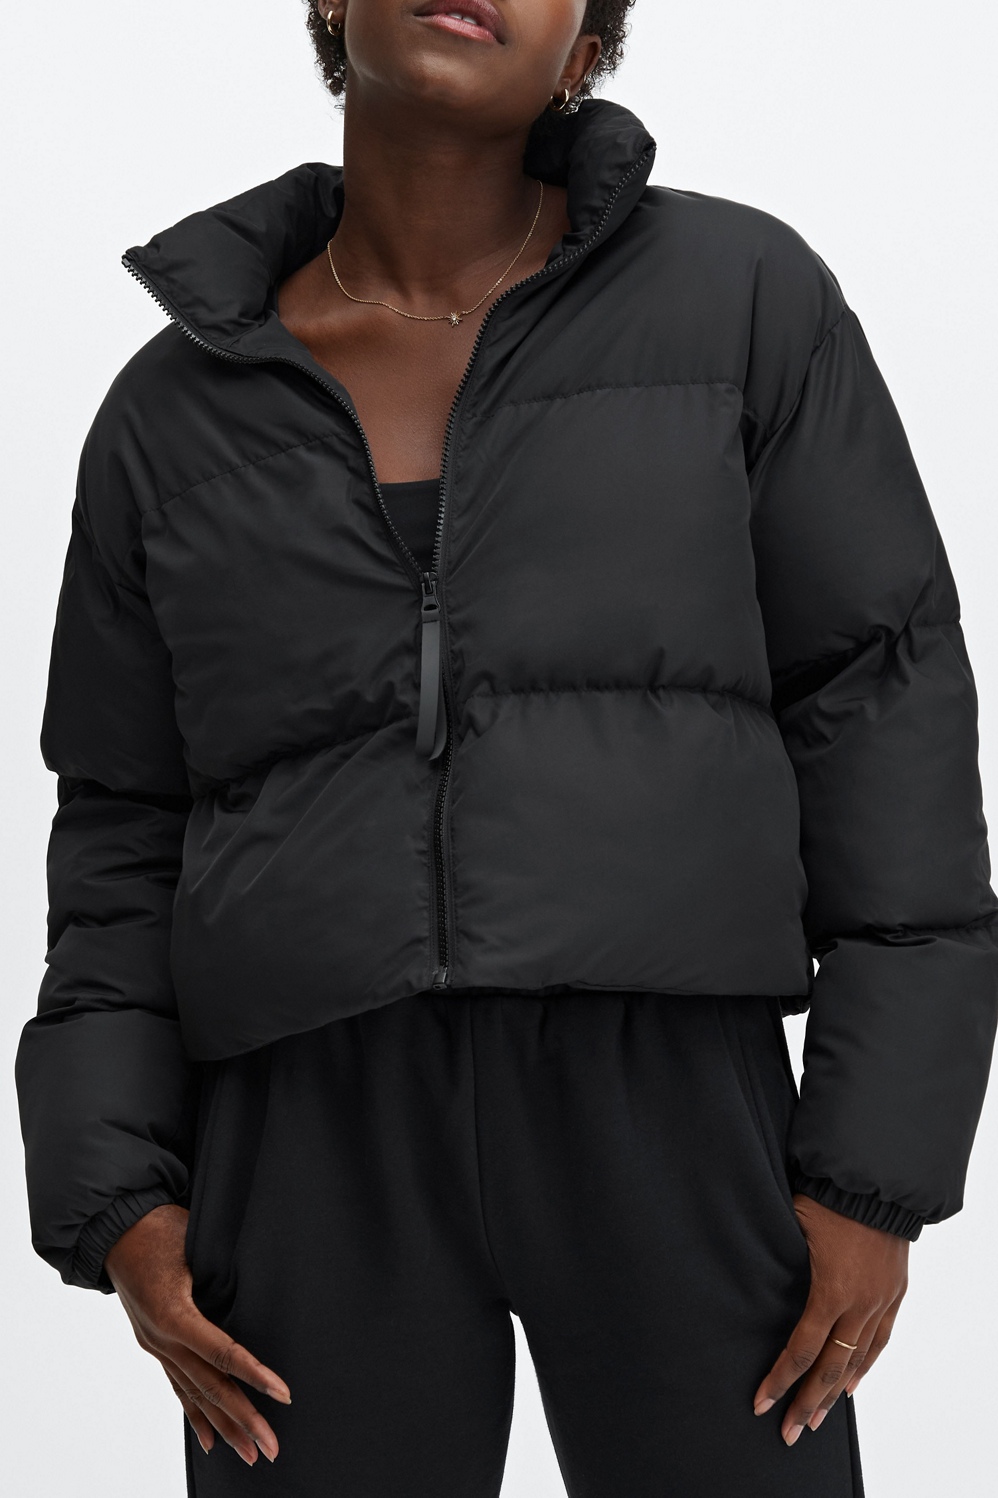 Fabletics hooded puffer